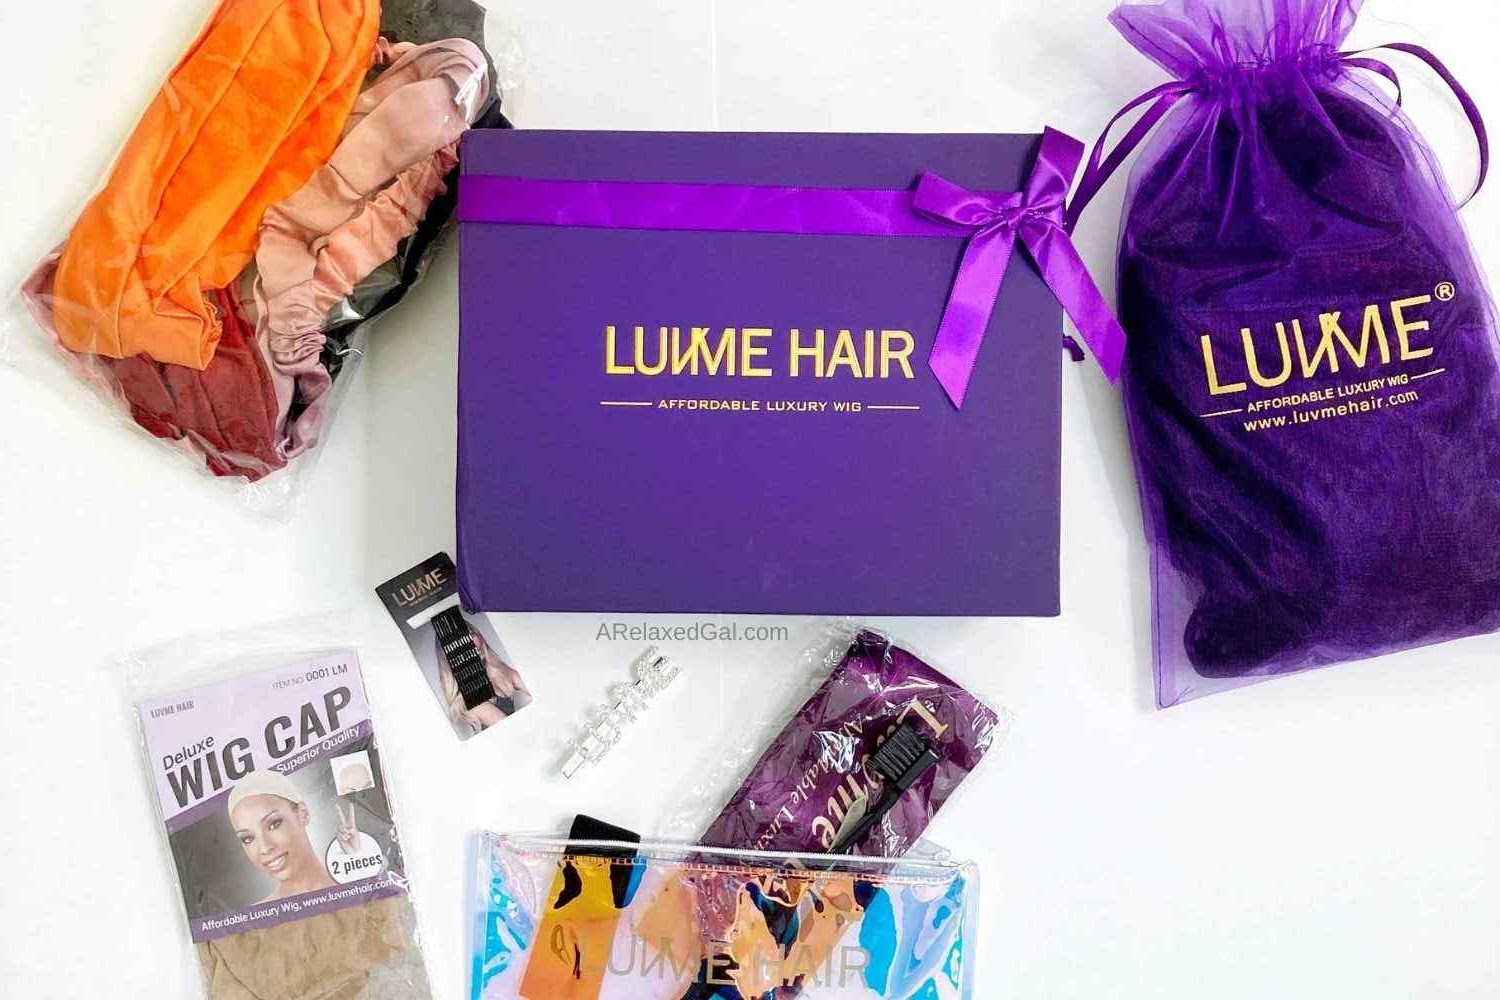 Luveme hair headband wig and accessories | A Relaxed Gal